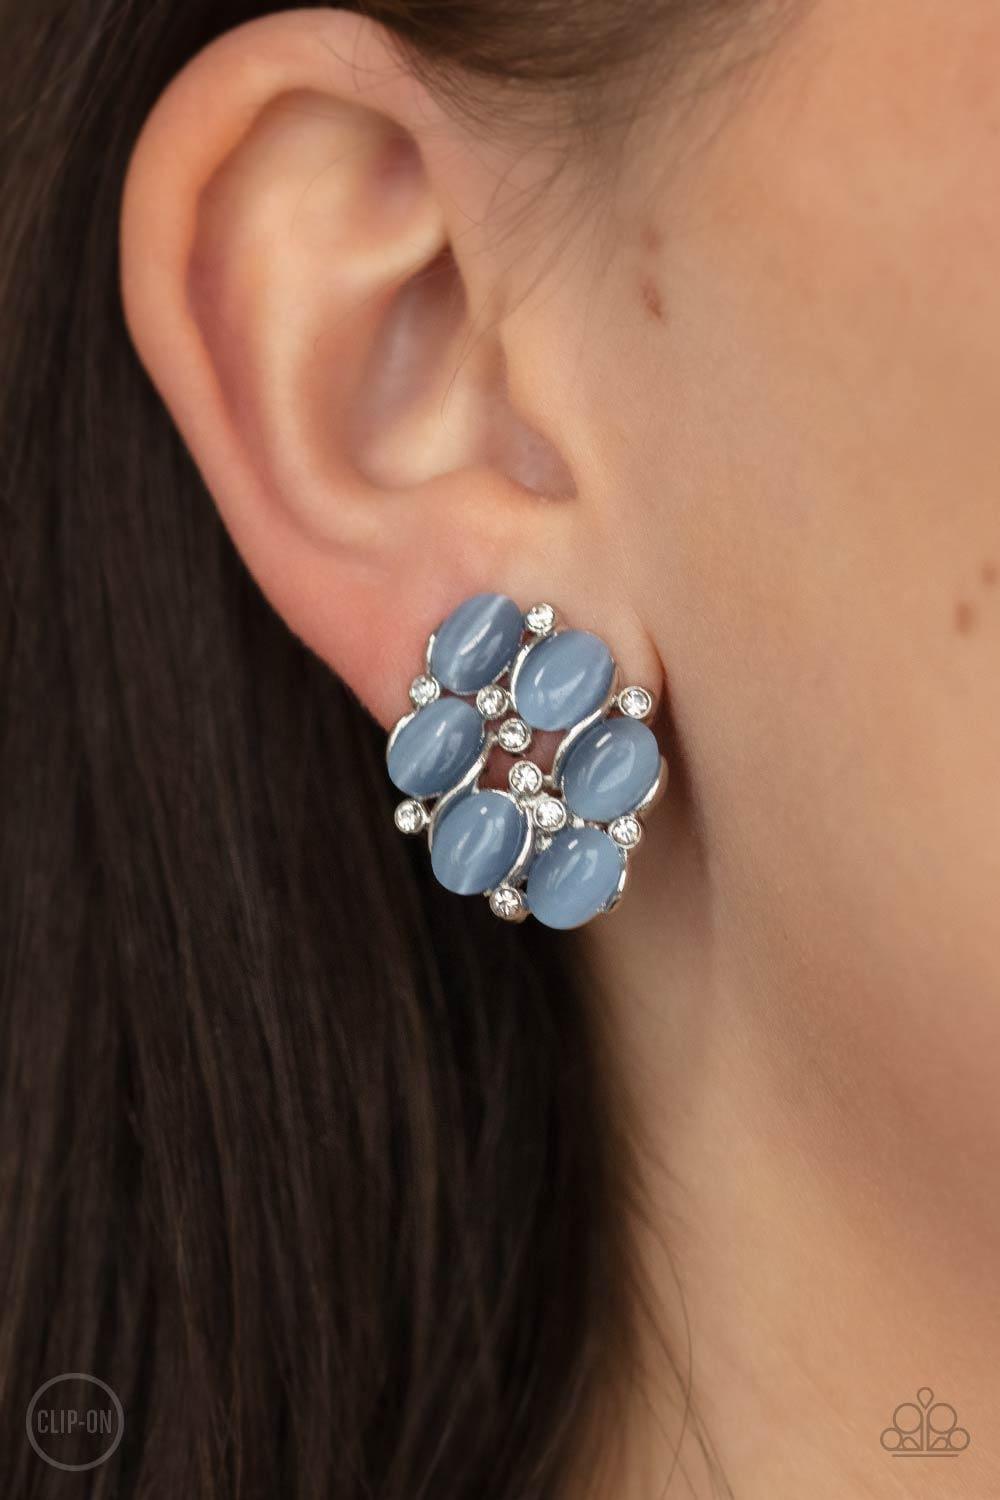 Paparazzi Accessories - Row, Row, Row Your Yacht - Blue Clip-on Earrings - Bling by JessieK